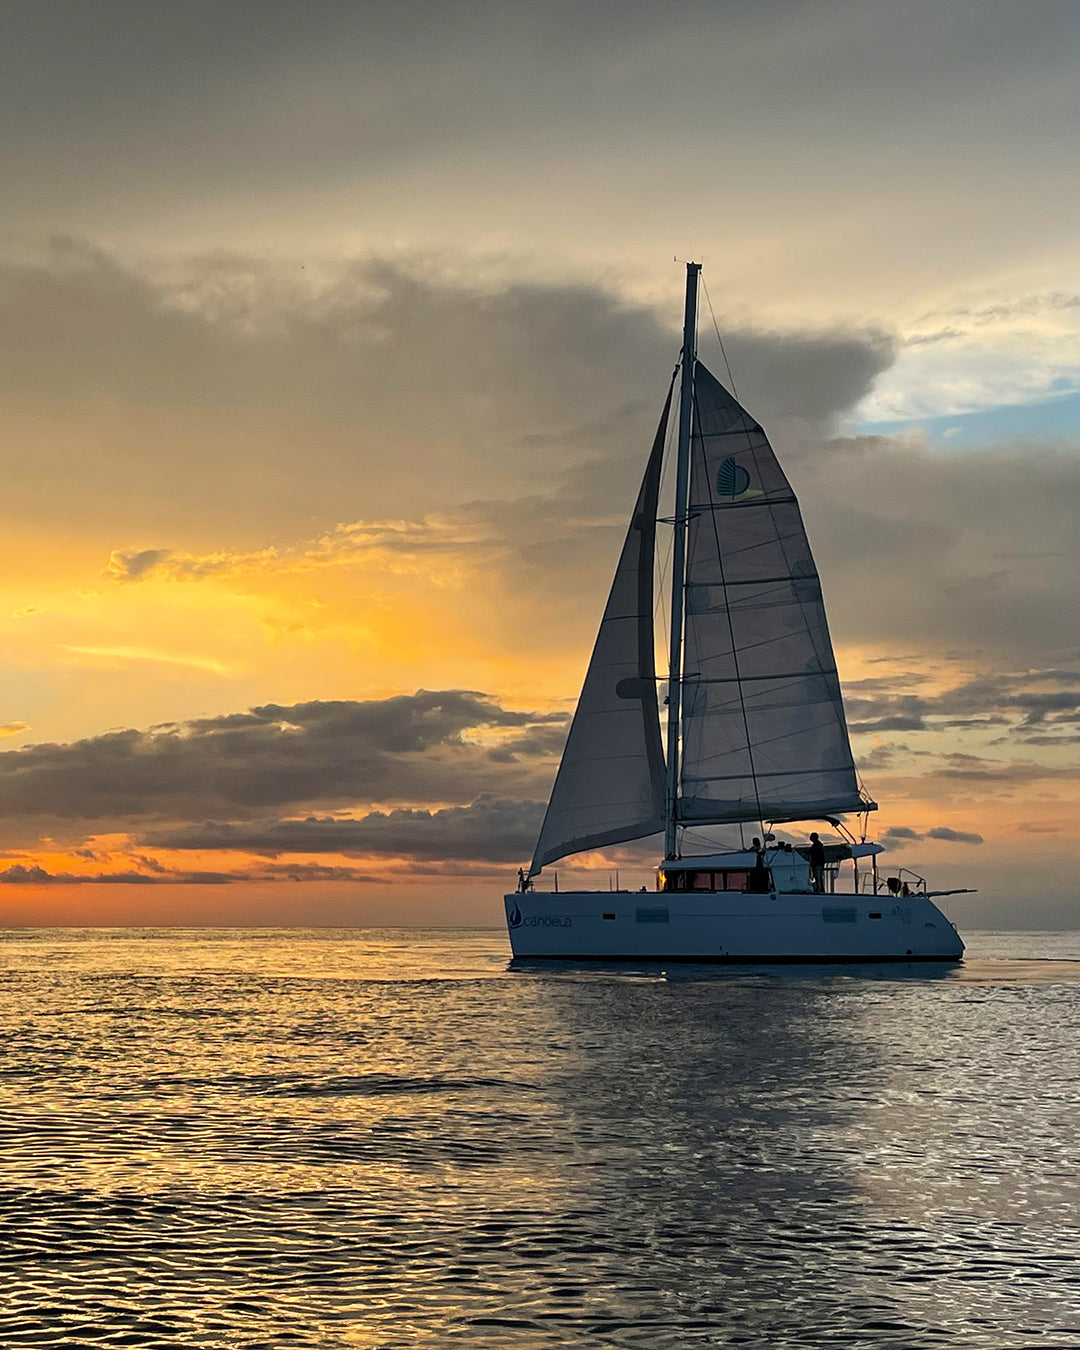 Sunset Sailing Experience (3 hours)